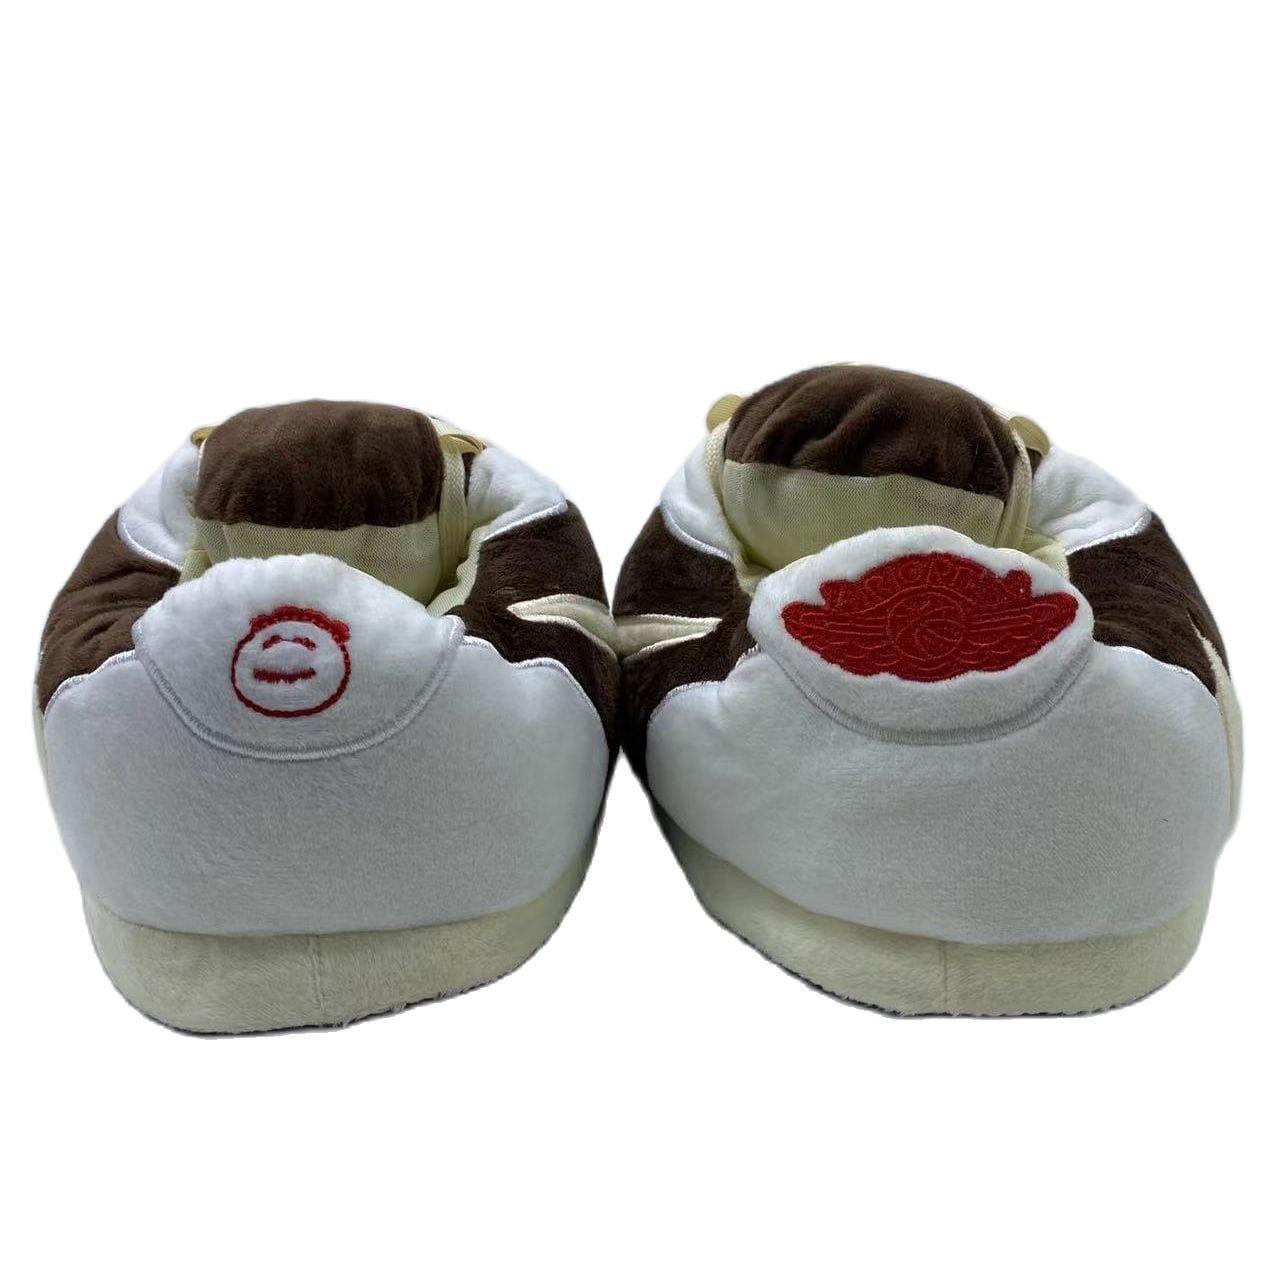 Slip Kickz  Slippers One Size Fits All ( UK 3 - 10.5 ) White and Brown Travis Scott Lows Novelty Slippers